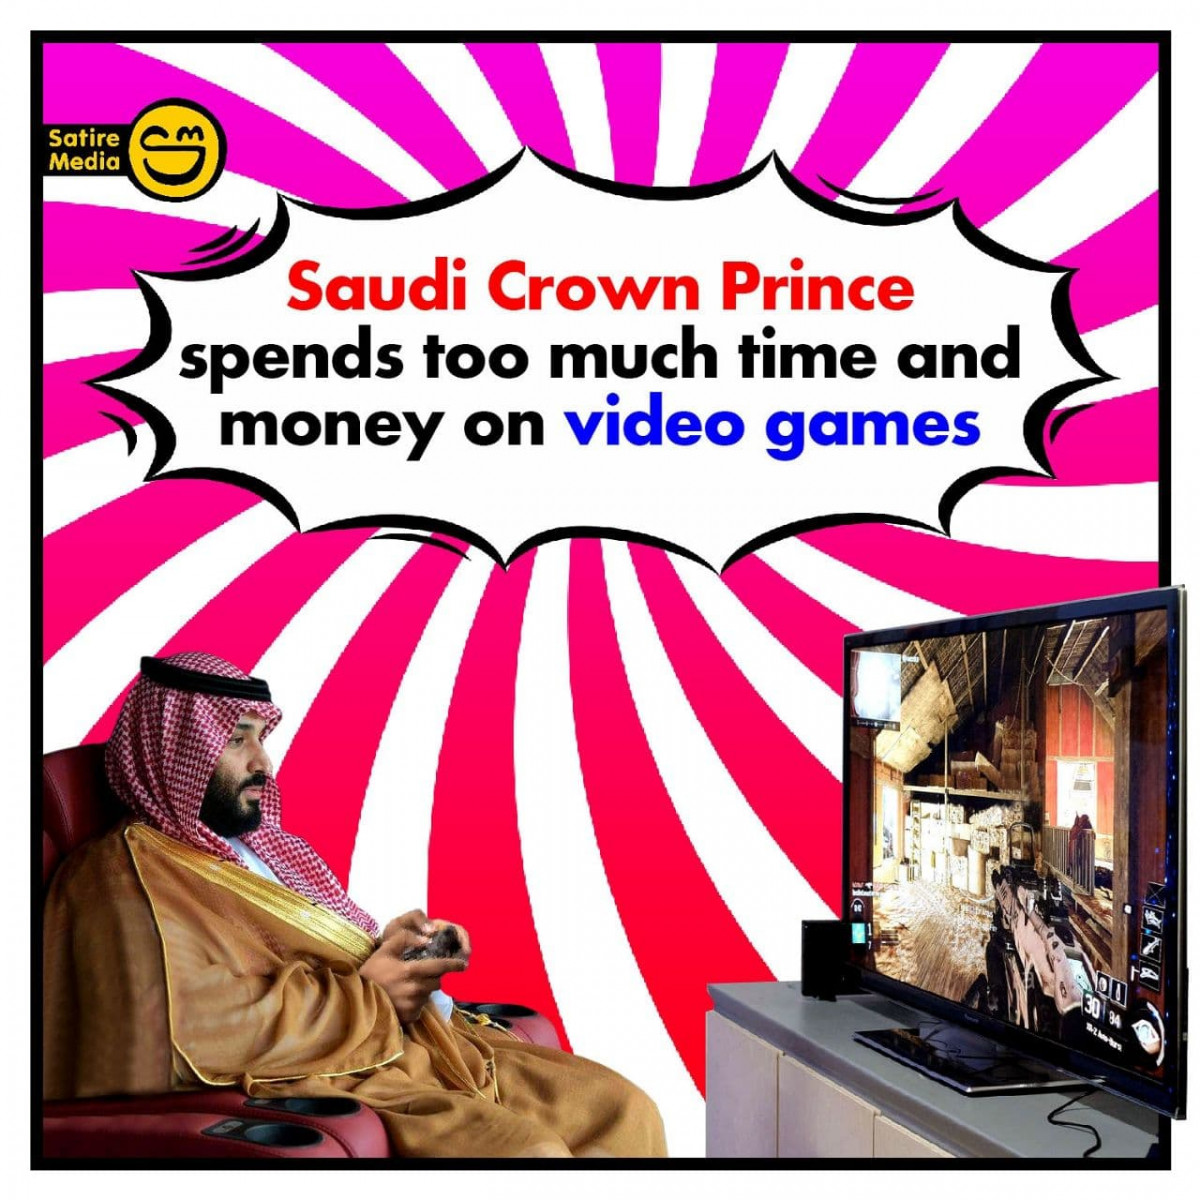 Saudi Crown Prince spends too much time and money on video games